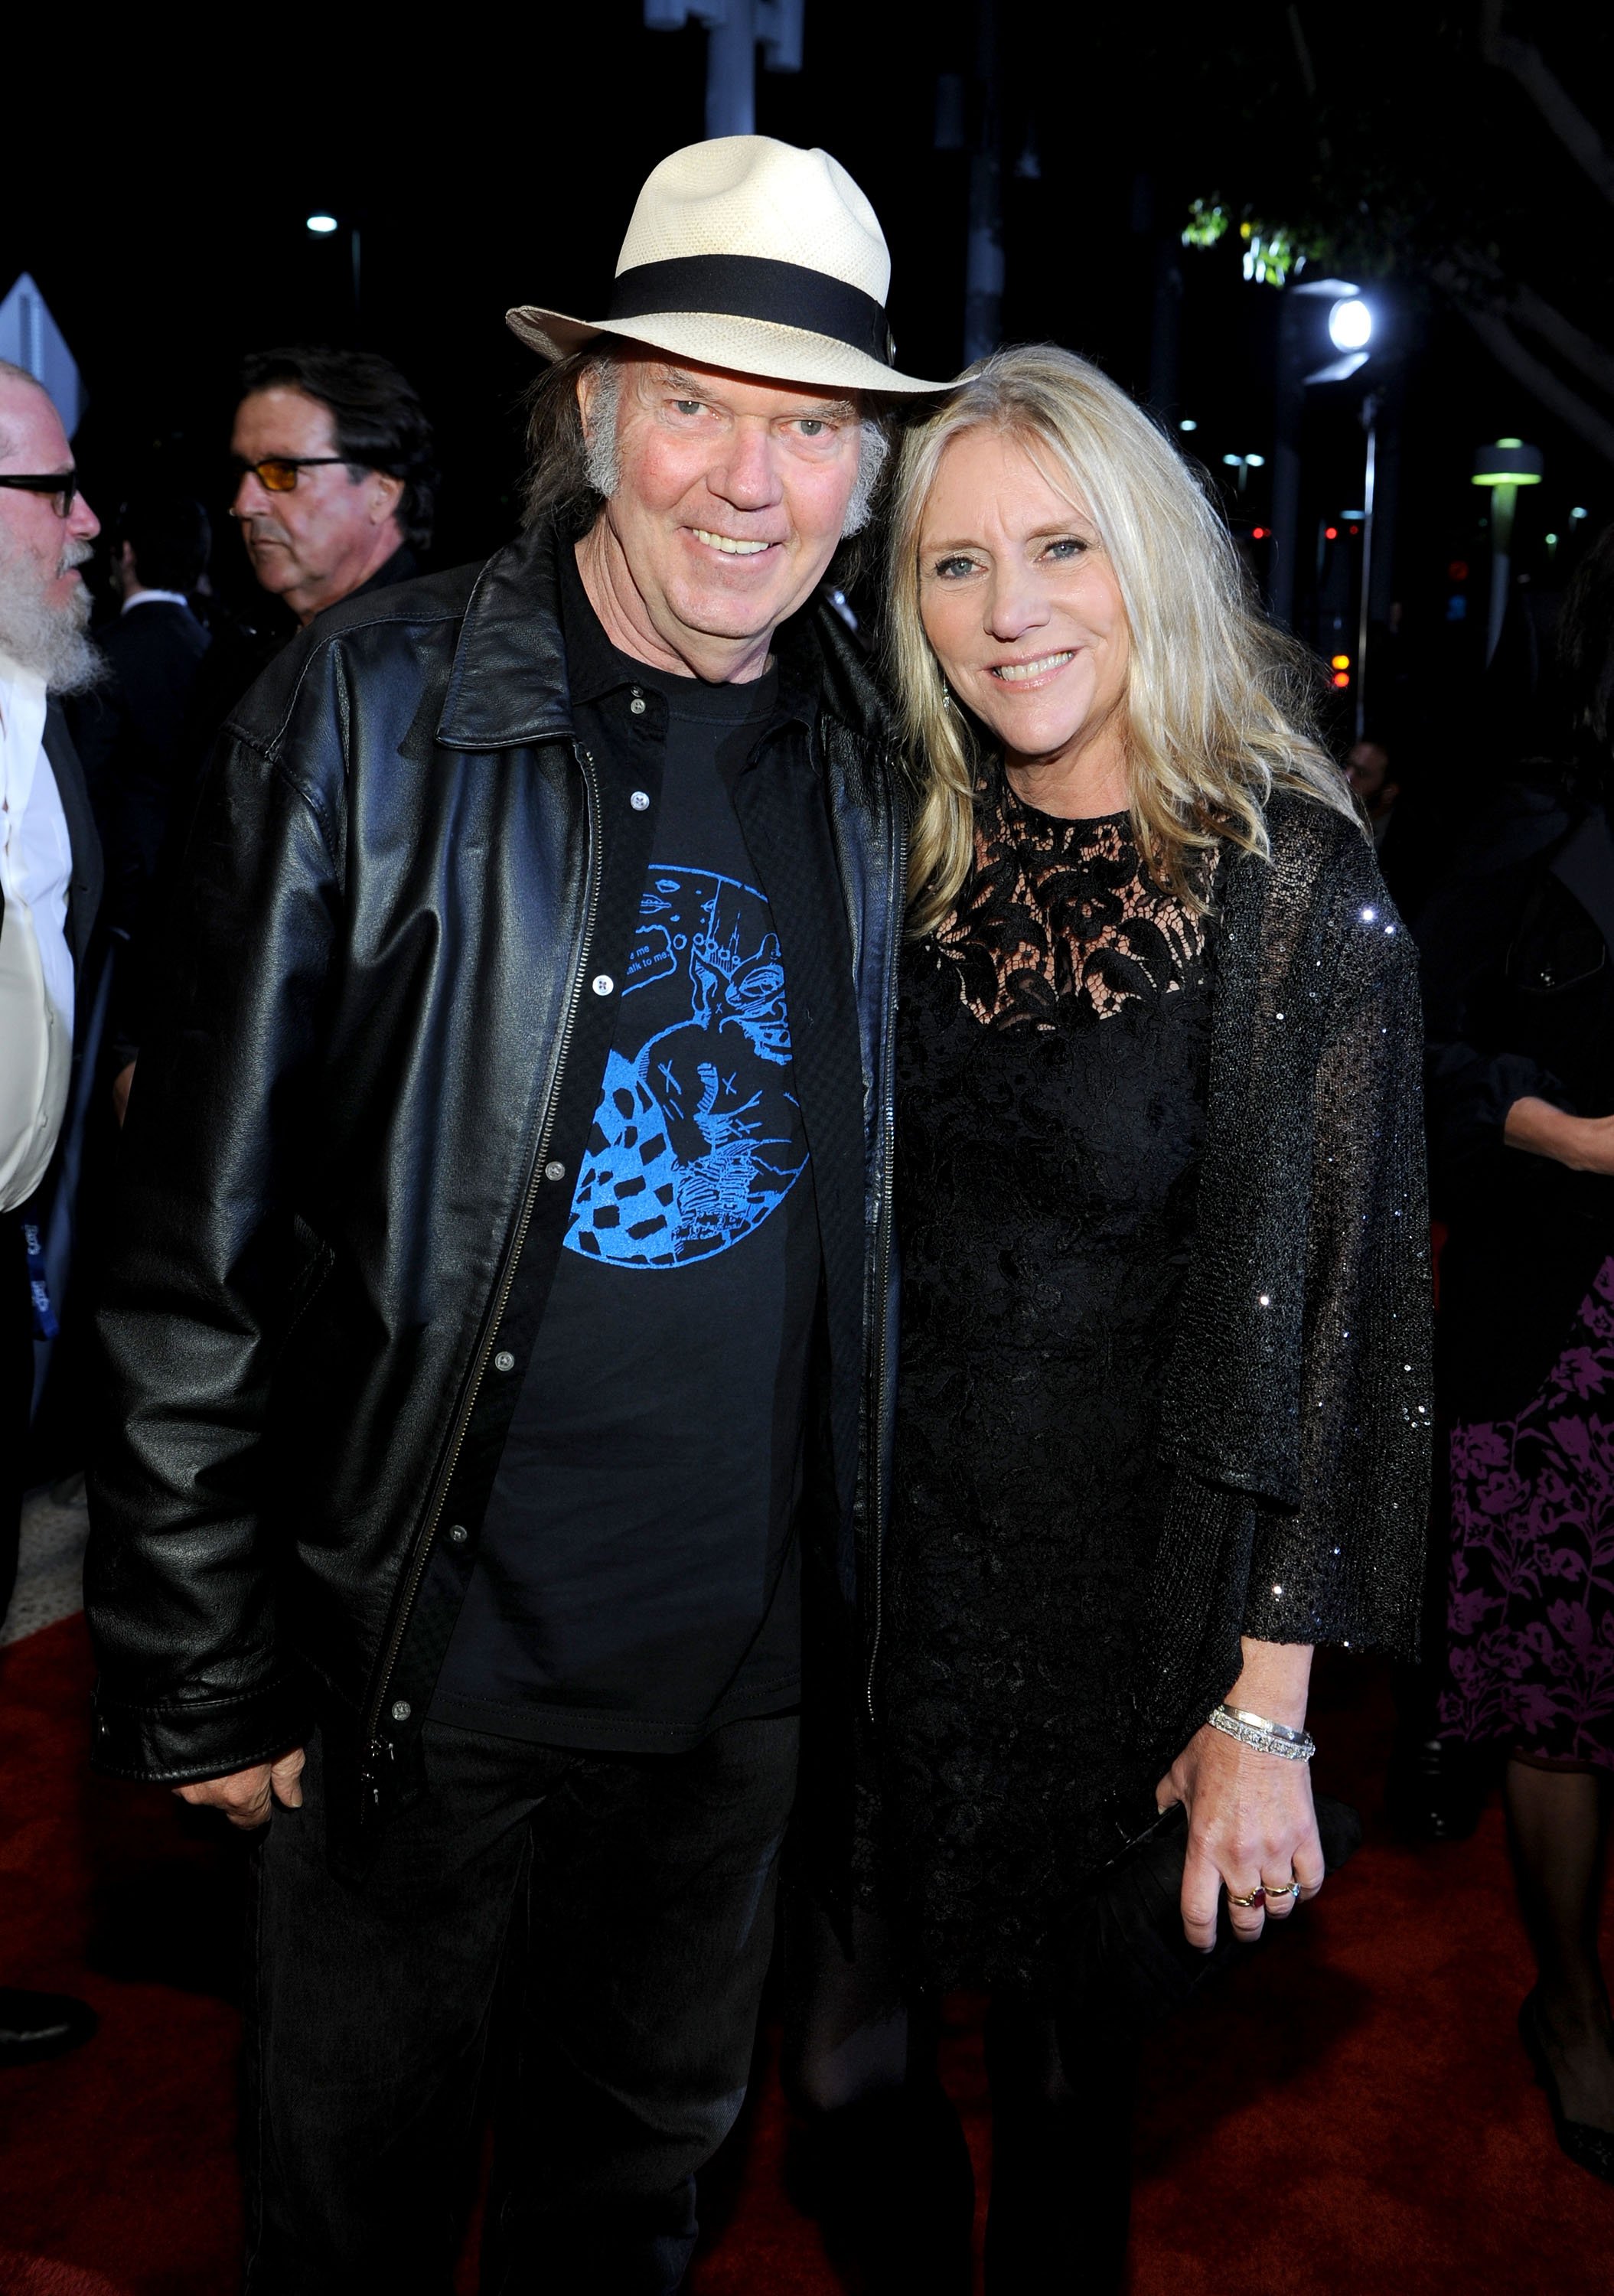 Neil Young and Pegi Young attend the 2012 MusiCares Person of the Year Tribute in Los Angeles, California on February 10, 2012 | Photo: Getty Images